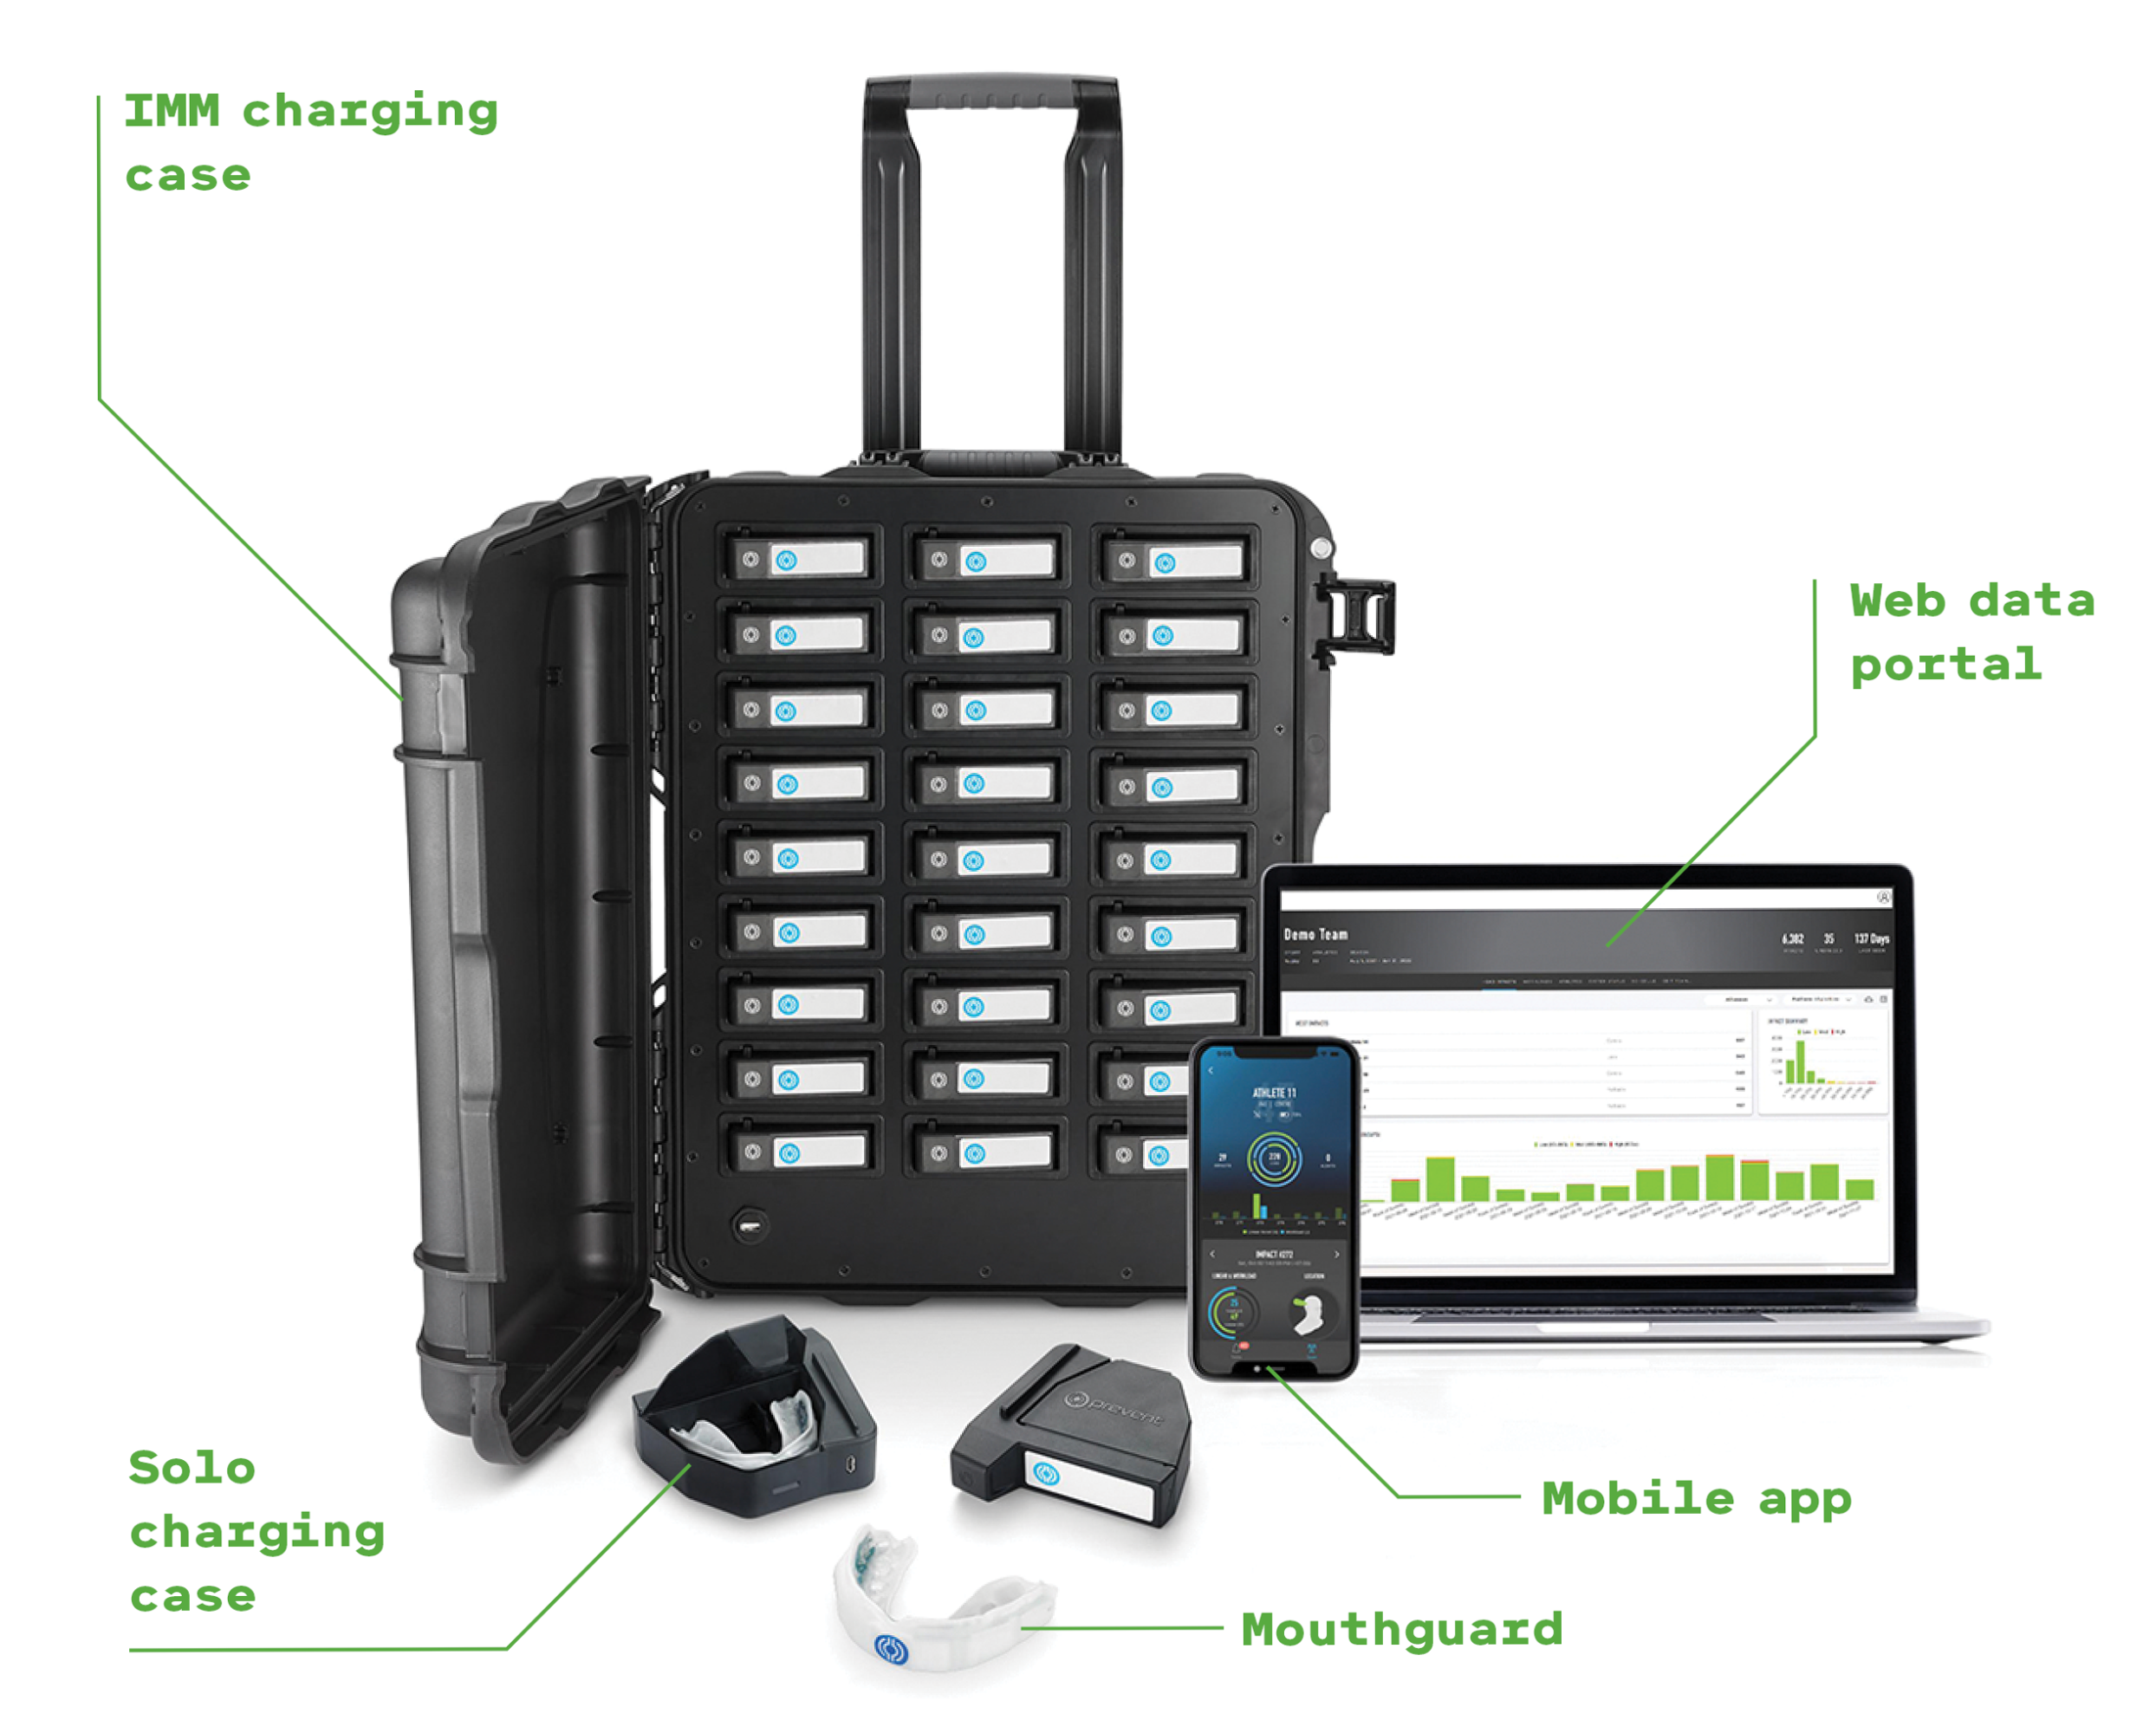 a product family shot showing the IMM charging case, mouthguard, mobile app on phone, web data portal on laptop and the solo charging case